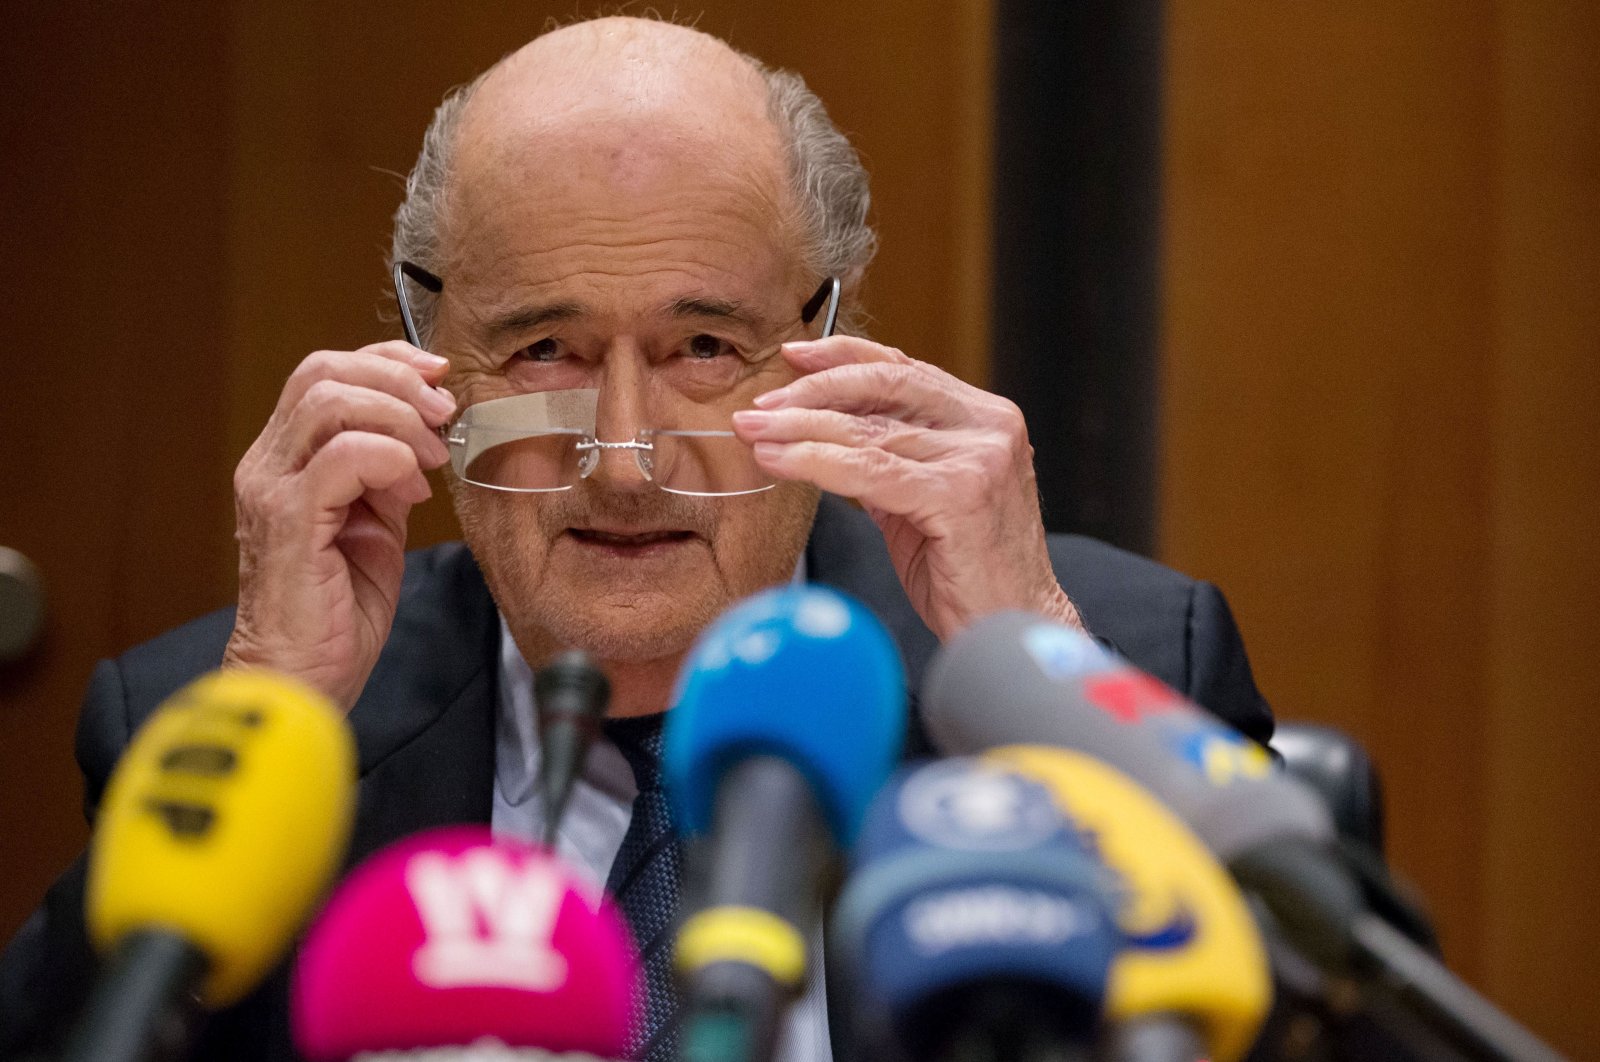 Blatter staunchly blasts Infantino’s revamped World Cup formats